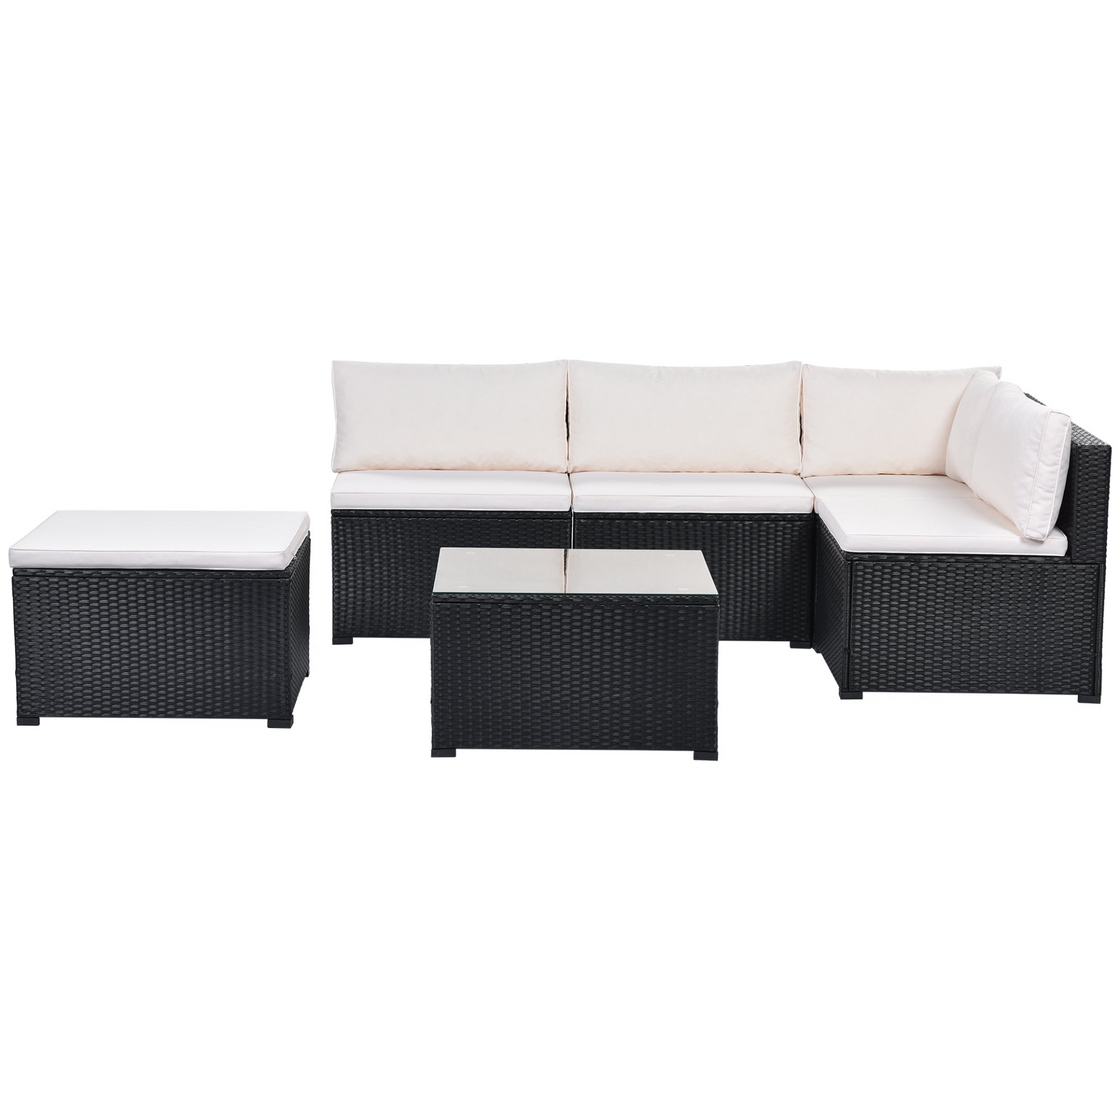 6-Piece Outdoor Furniture Set with PE Rattan Wicker, Patio Garden Sectional Sofa Chair